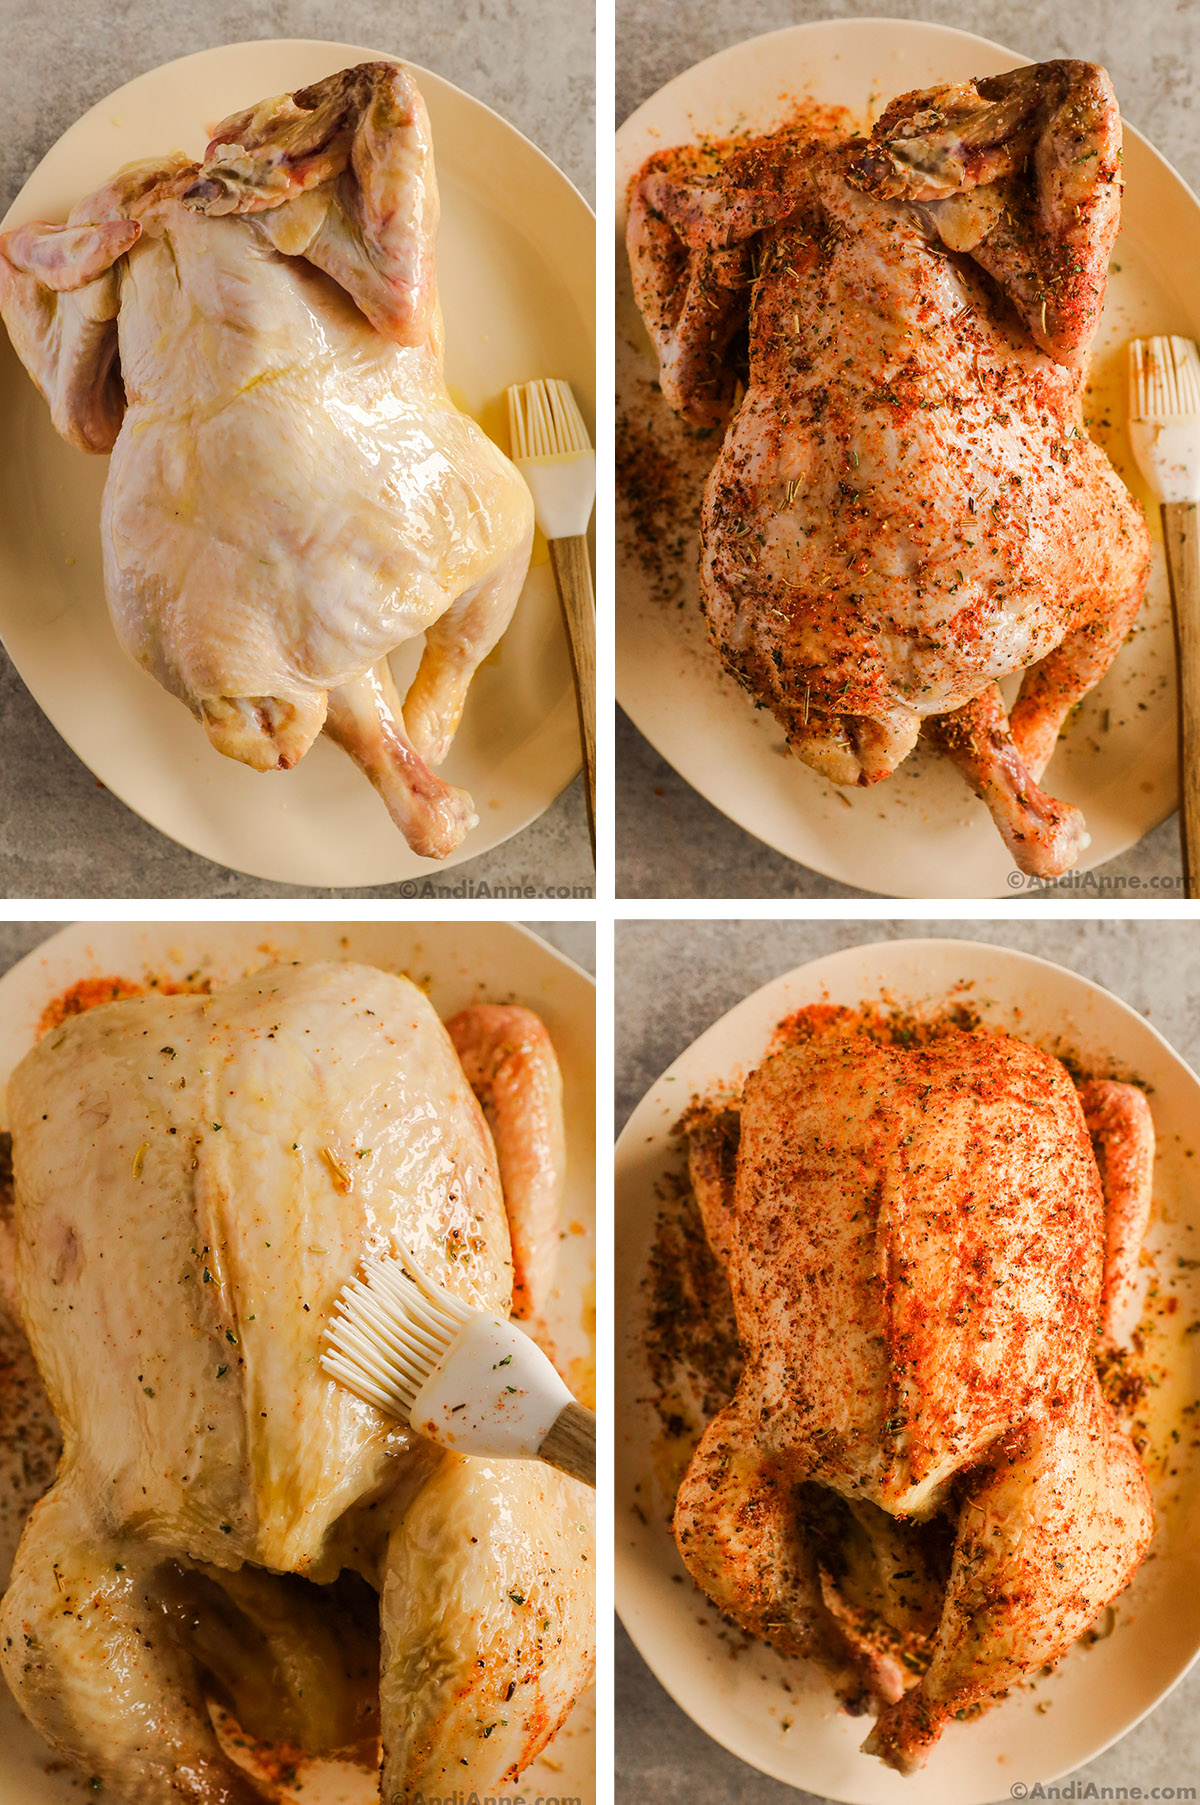 Four images of a raw chicken. First two are the chicken upside down on a plate, first rubbed with oil, then a spice mix. Third image is front side of chicken rubbed with oil, then rubbed with spice mix.